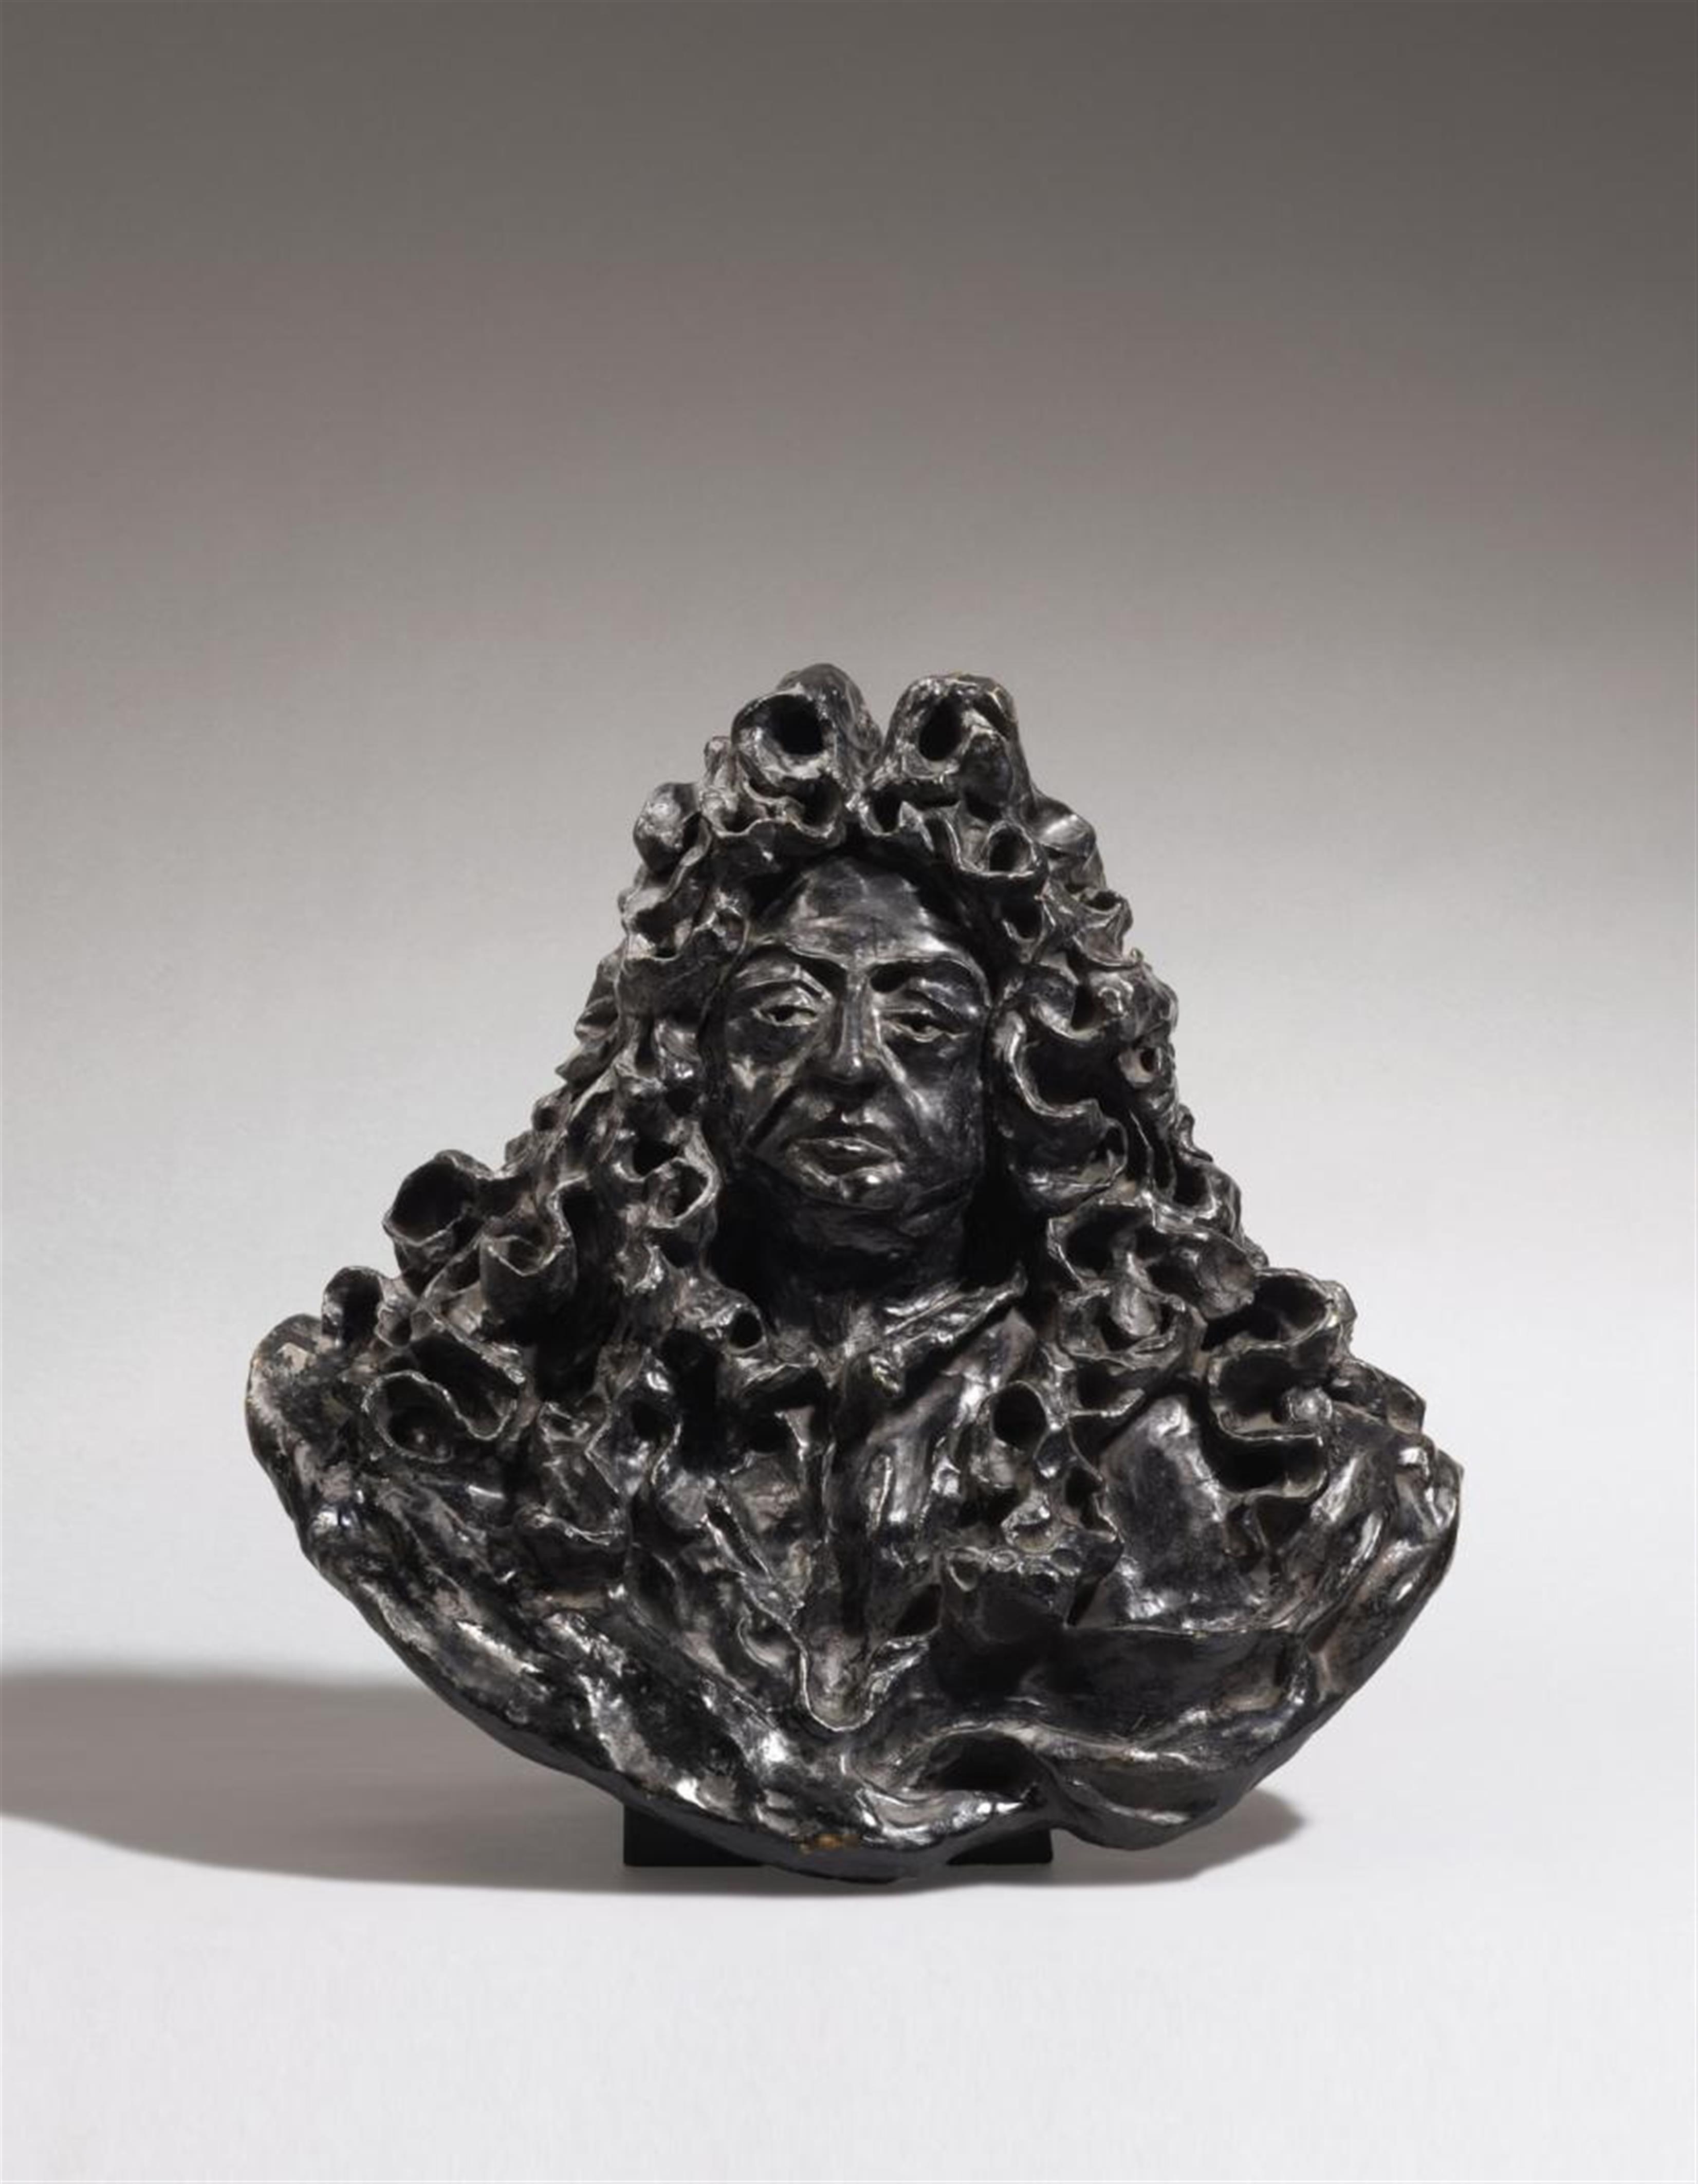 Honoré Daumier, copy after - BUST OF KING LOUIS XIV OF FRANCE